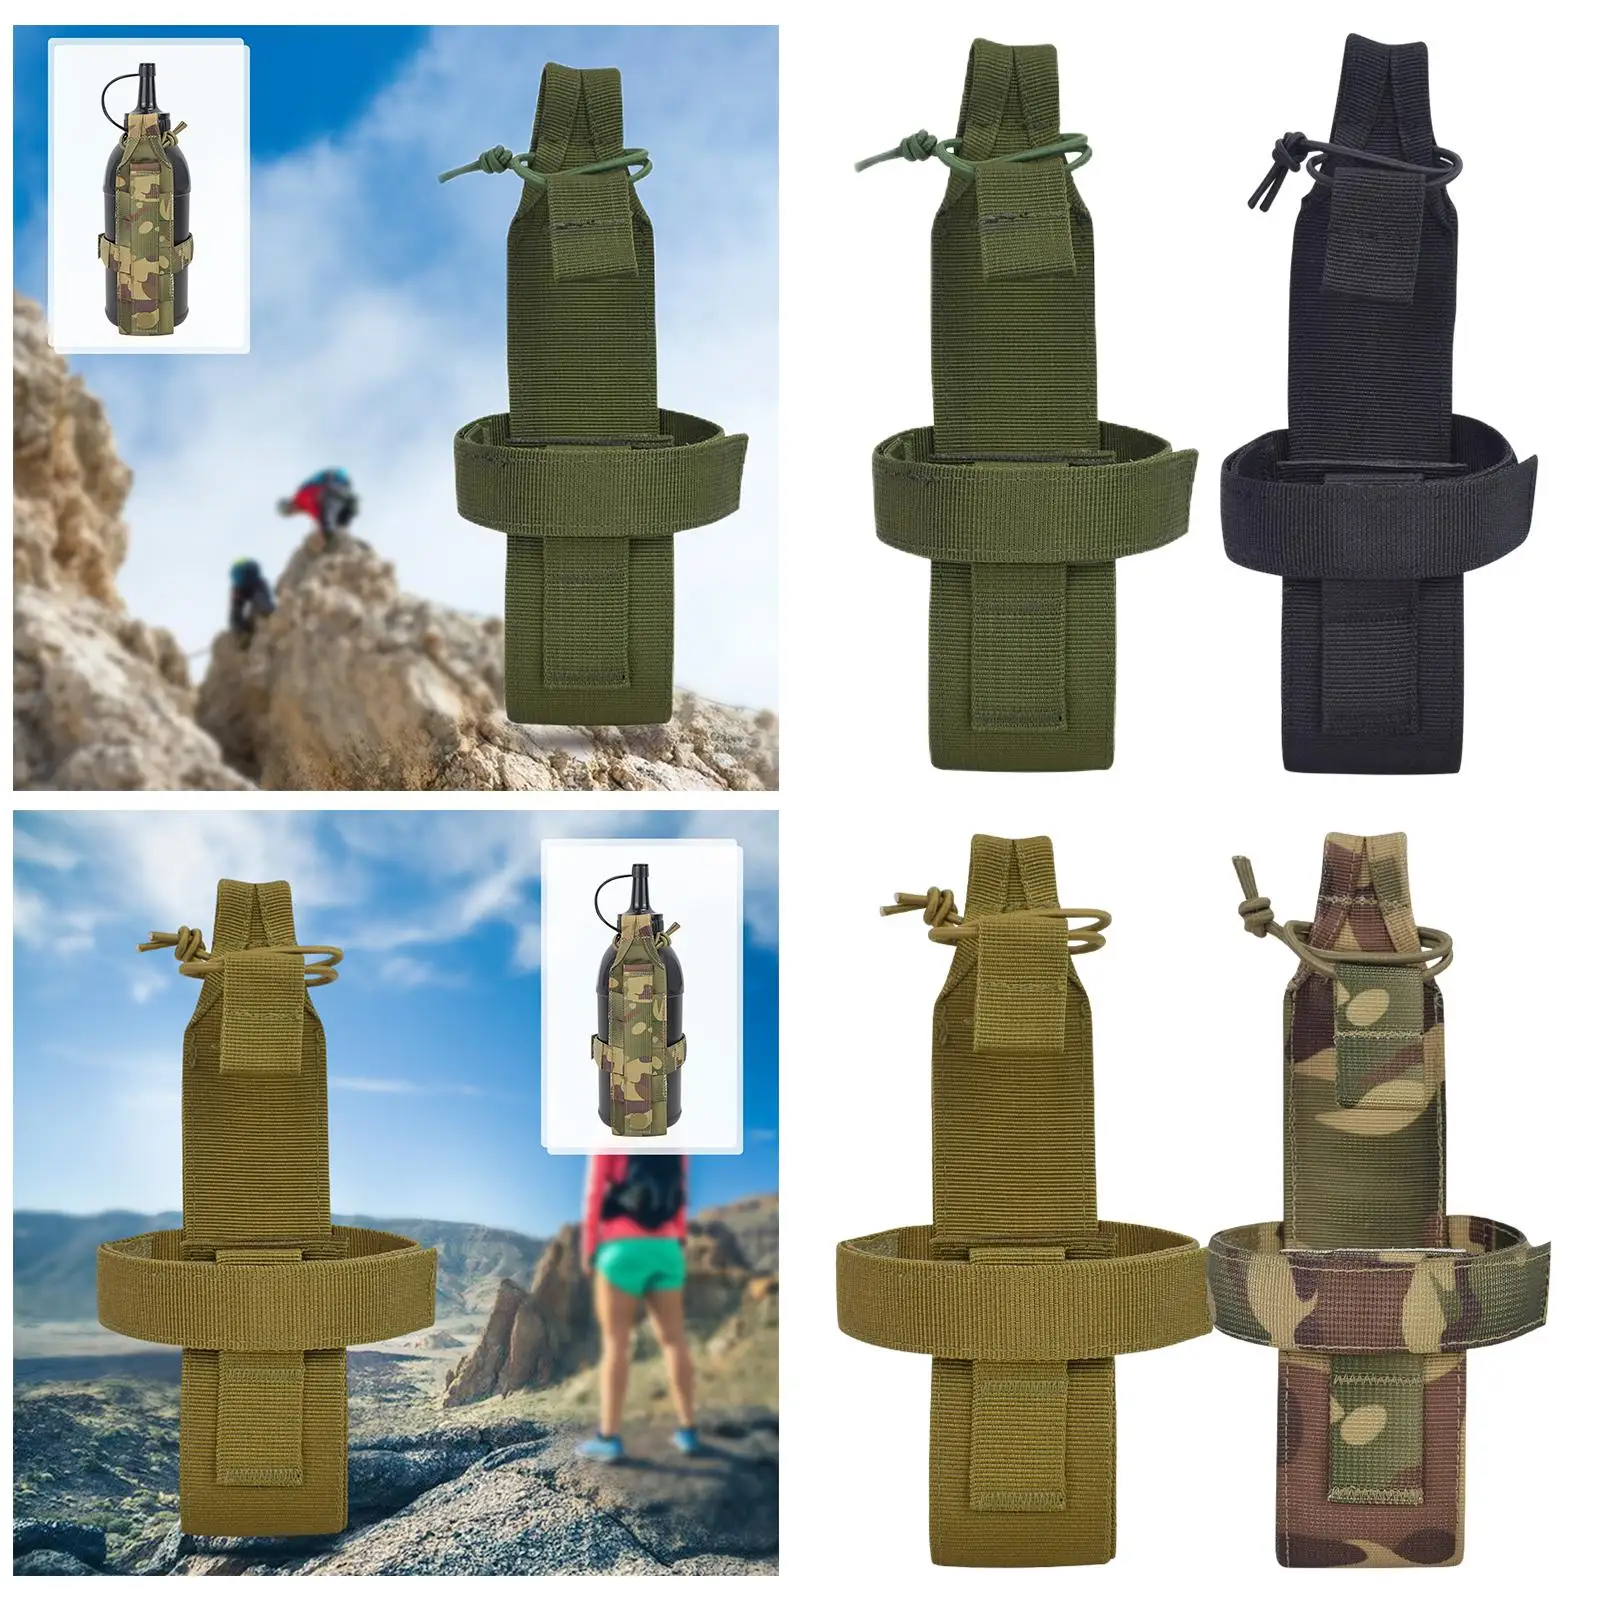 Adjustable Water Bottle Pouch Outdoor ,Portable Water Bottle Carrier Holder Bag for Hiking Hunting Sports Camping Cycling